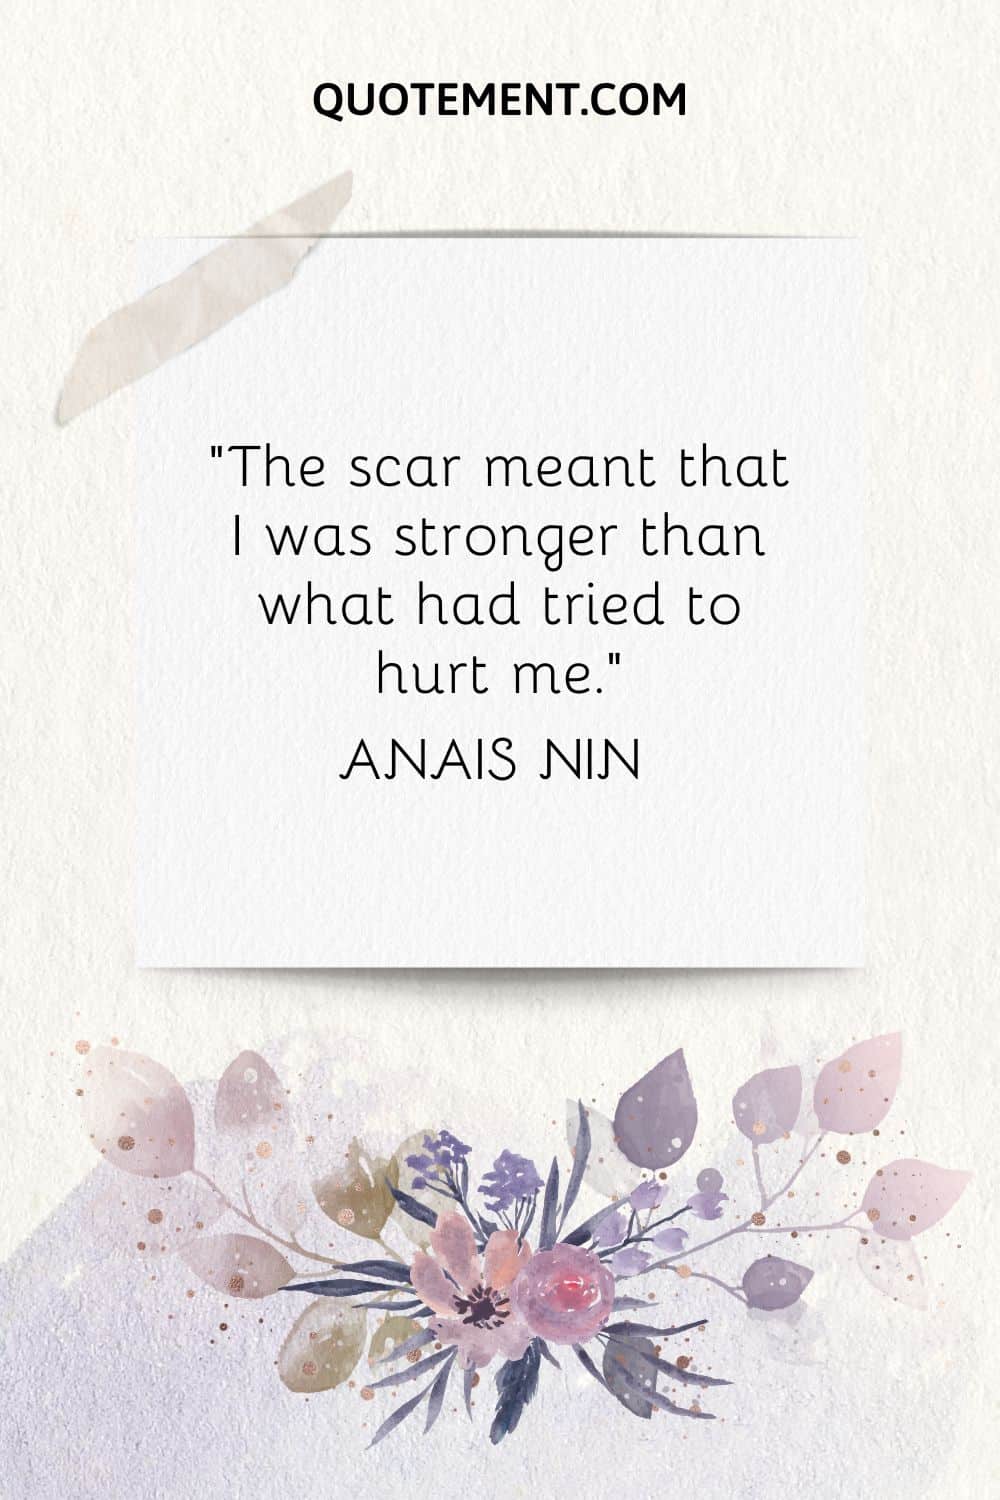 “The scar meant that I was stronger than what had tried to hurt me.” — Anais Nin